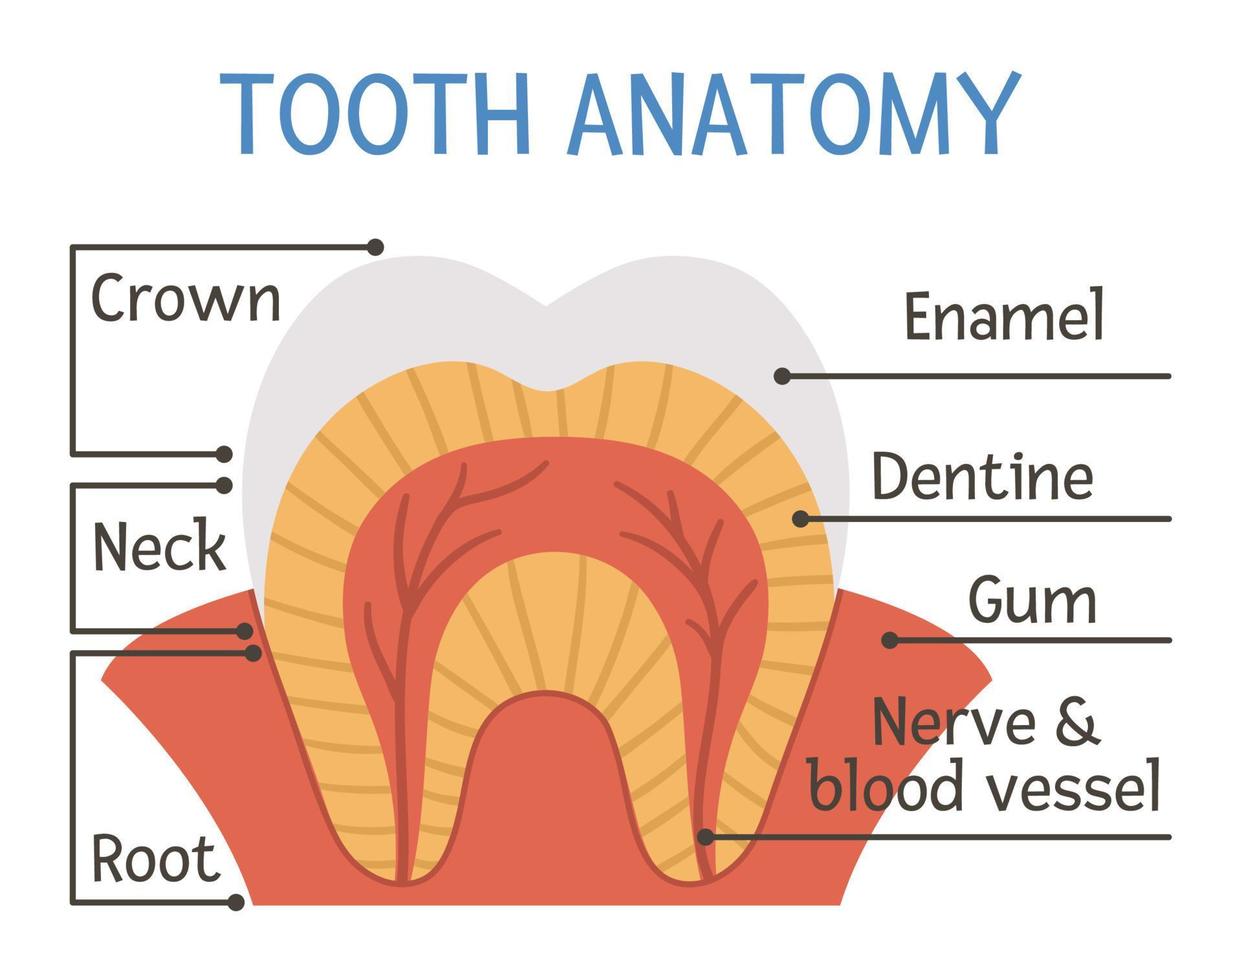 Tooth anatomy poster. Teeth structure scheme with inscriptions. Dental parts illustration. Dentist clinic educational brochure template. Enamel, dentine and gum flat picture. Mouth care infographic vector